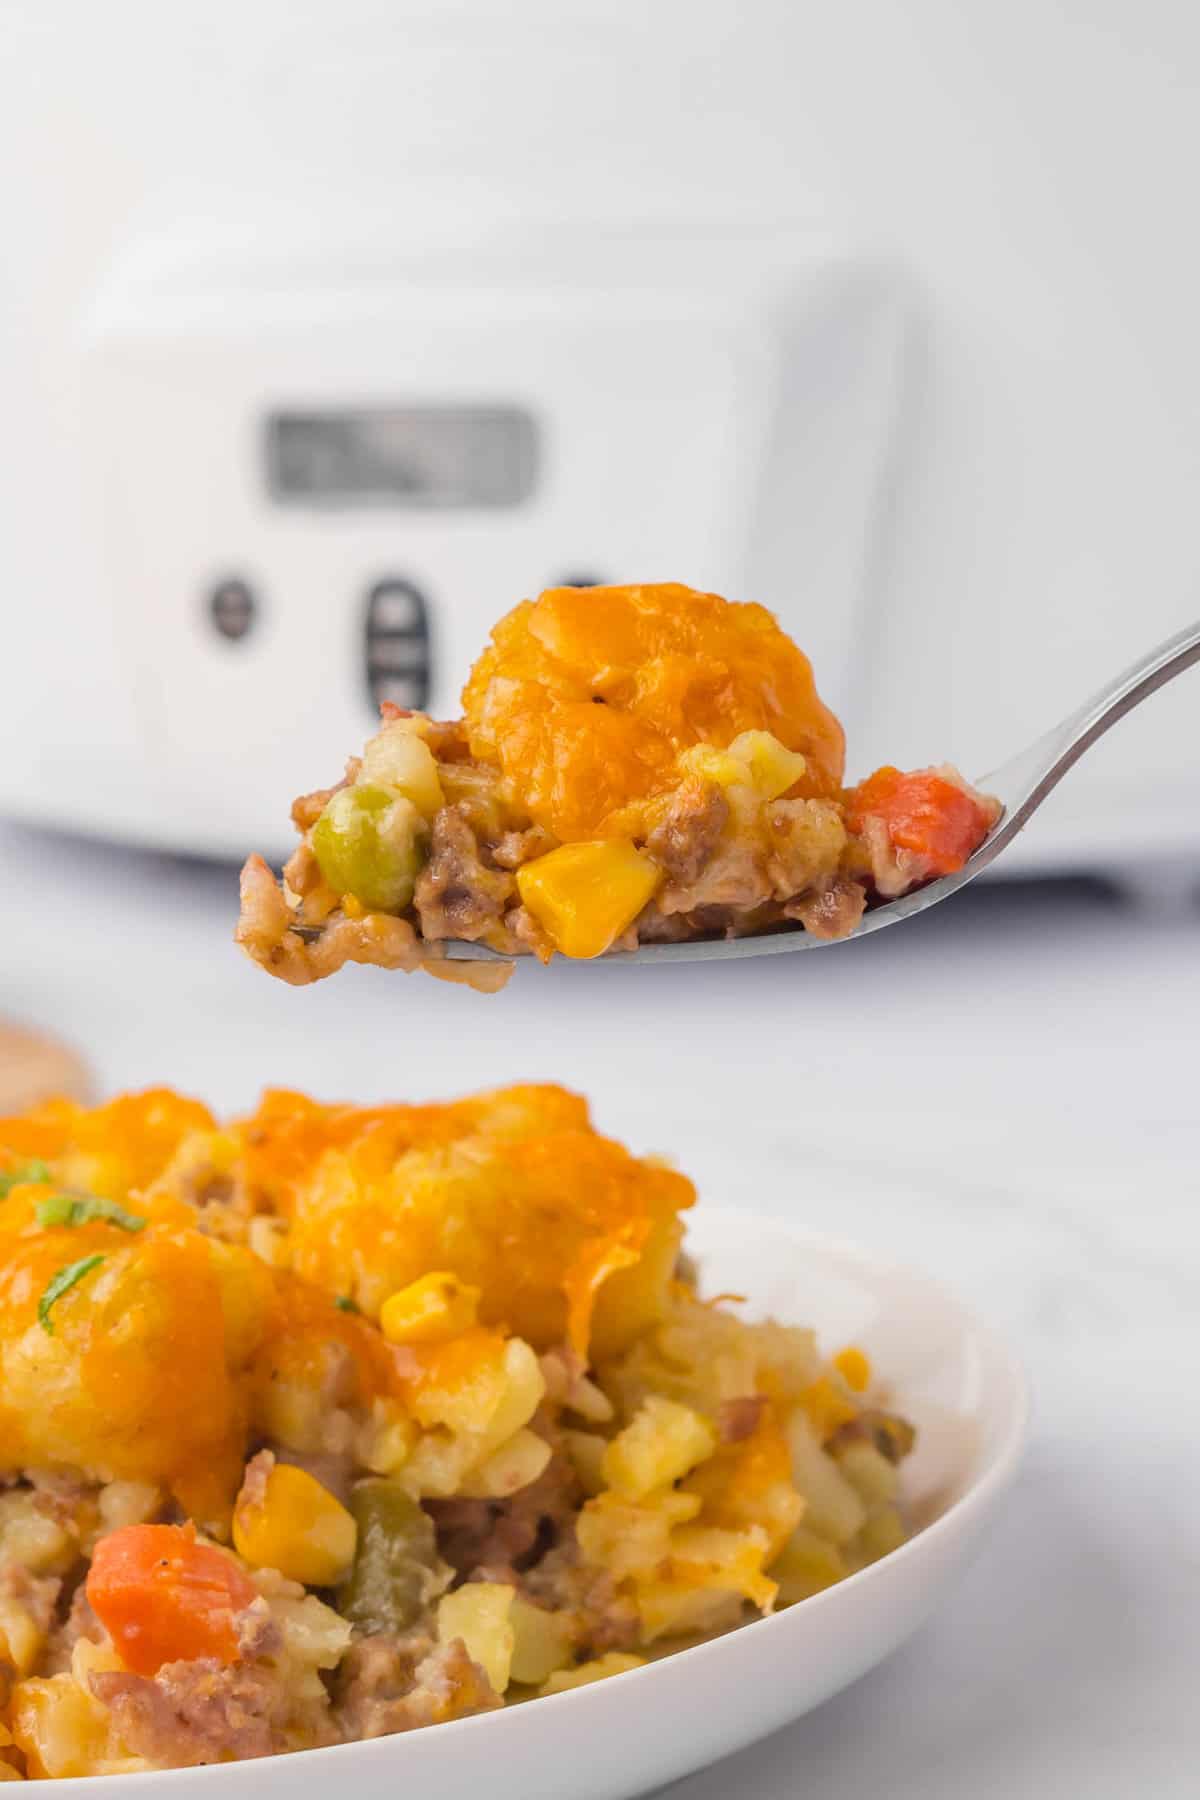 Crock Pot Tater Tot Casserole Recipe on Plate with a Forkful Ready to Enjoy with Crock Pot in Background